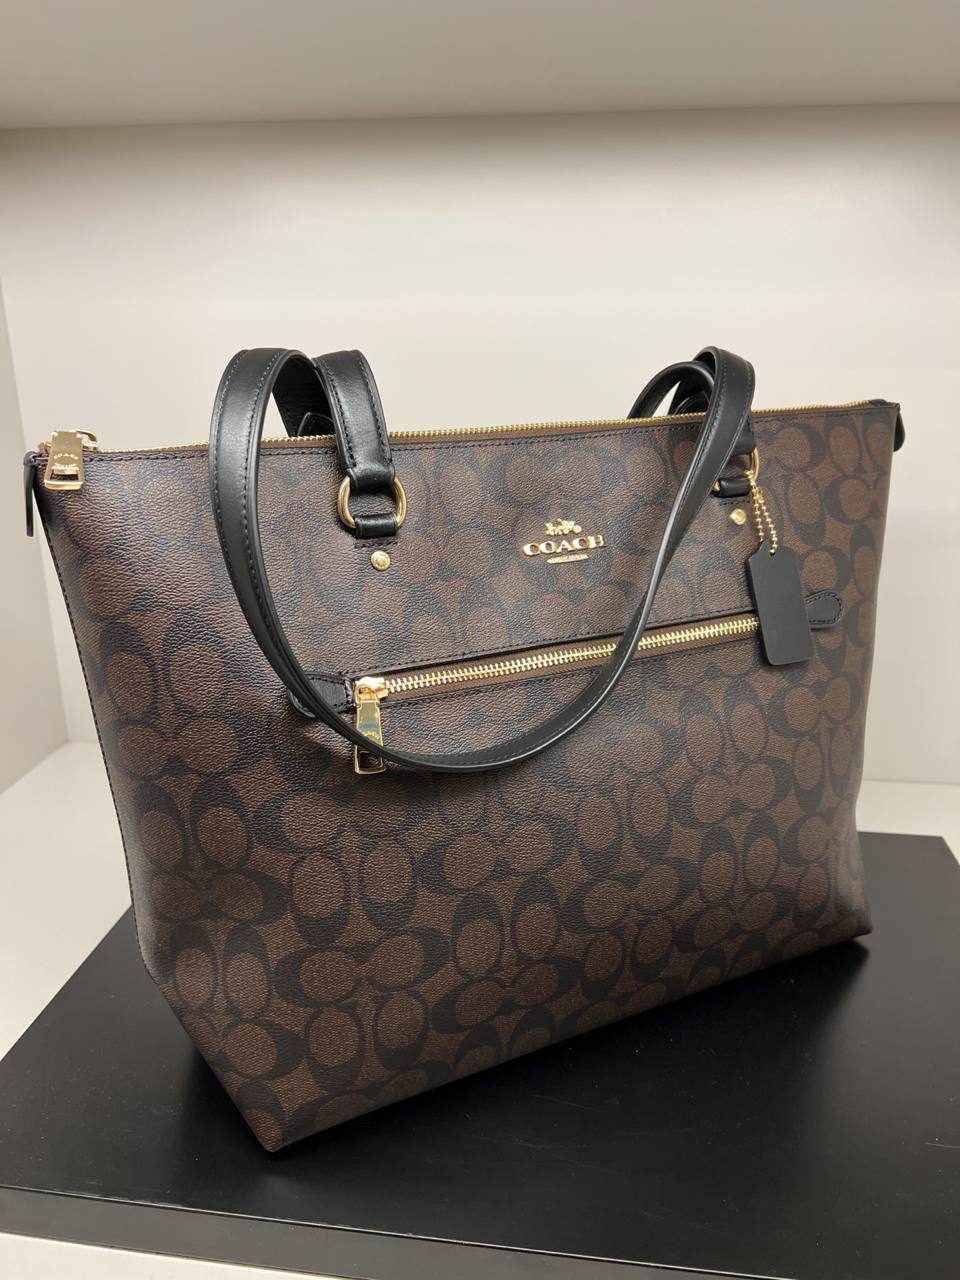 COACH Gallery tote brown black - Amory